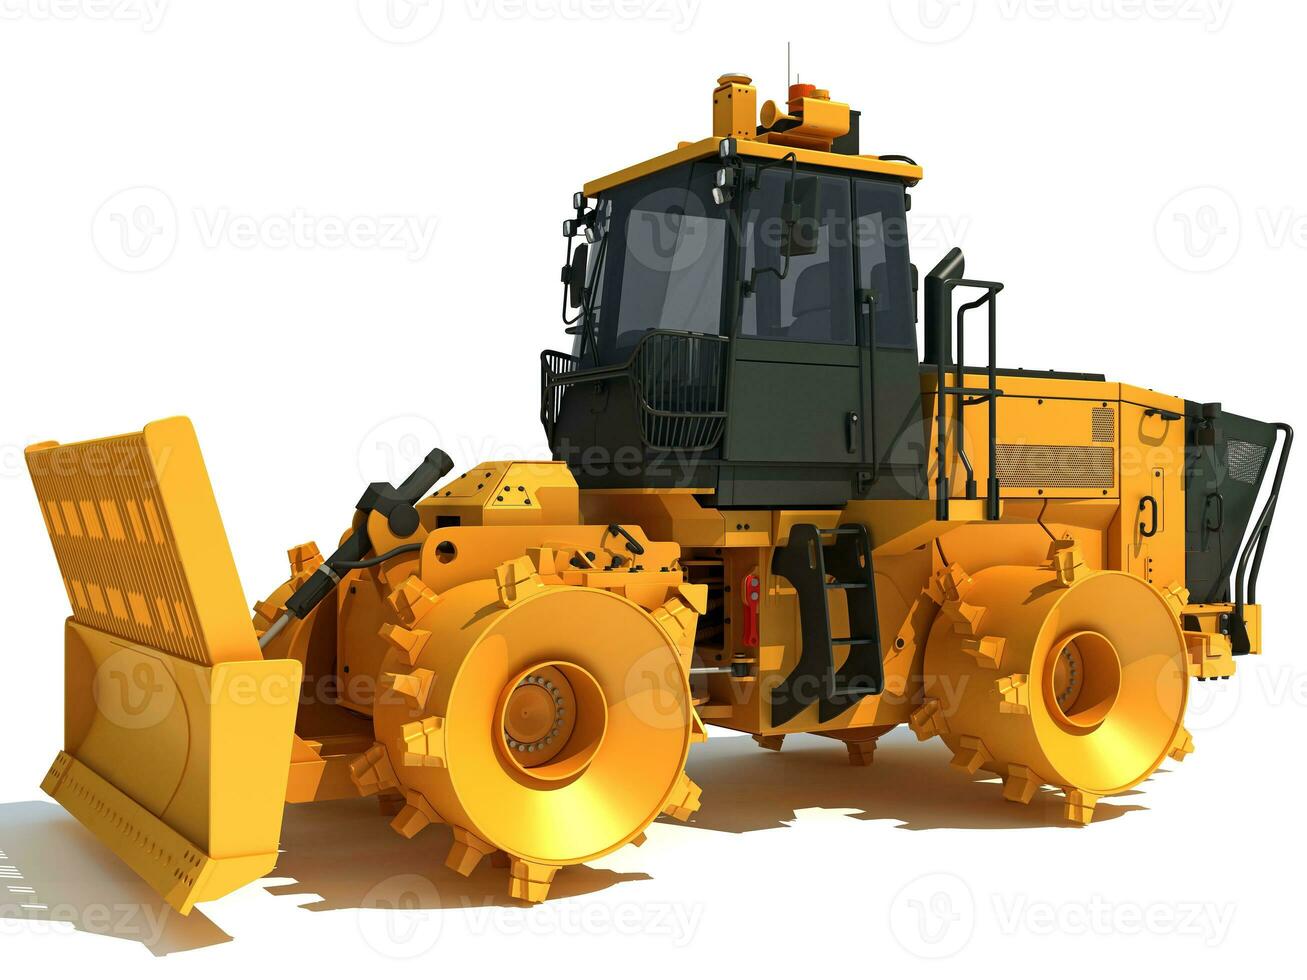 Landfill Compactor 3D rendering on white background photo